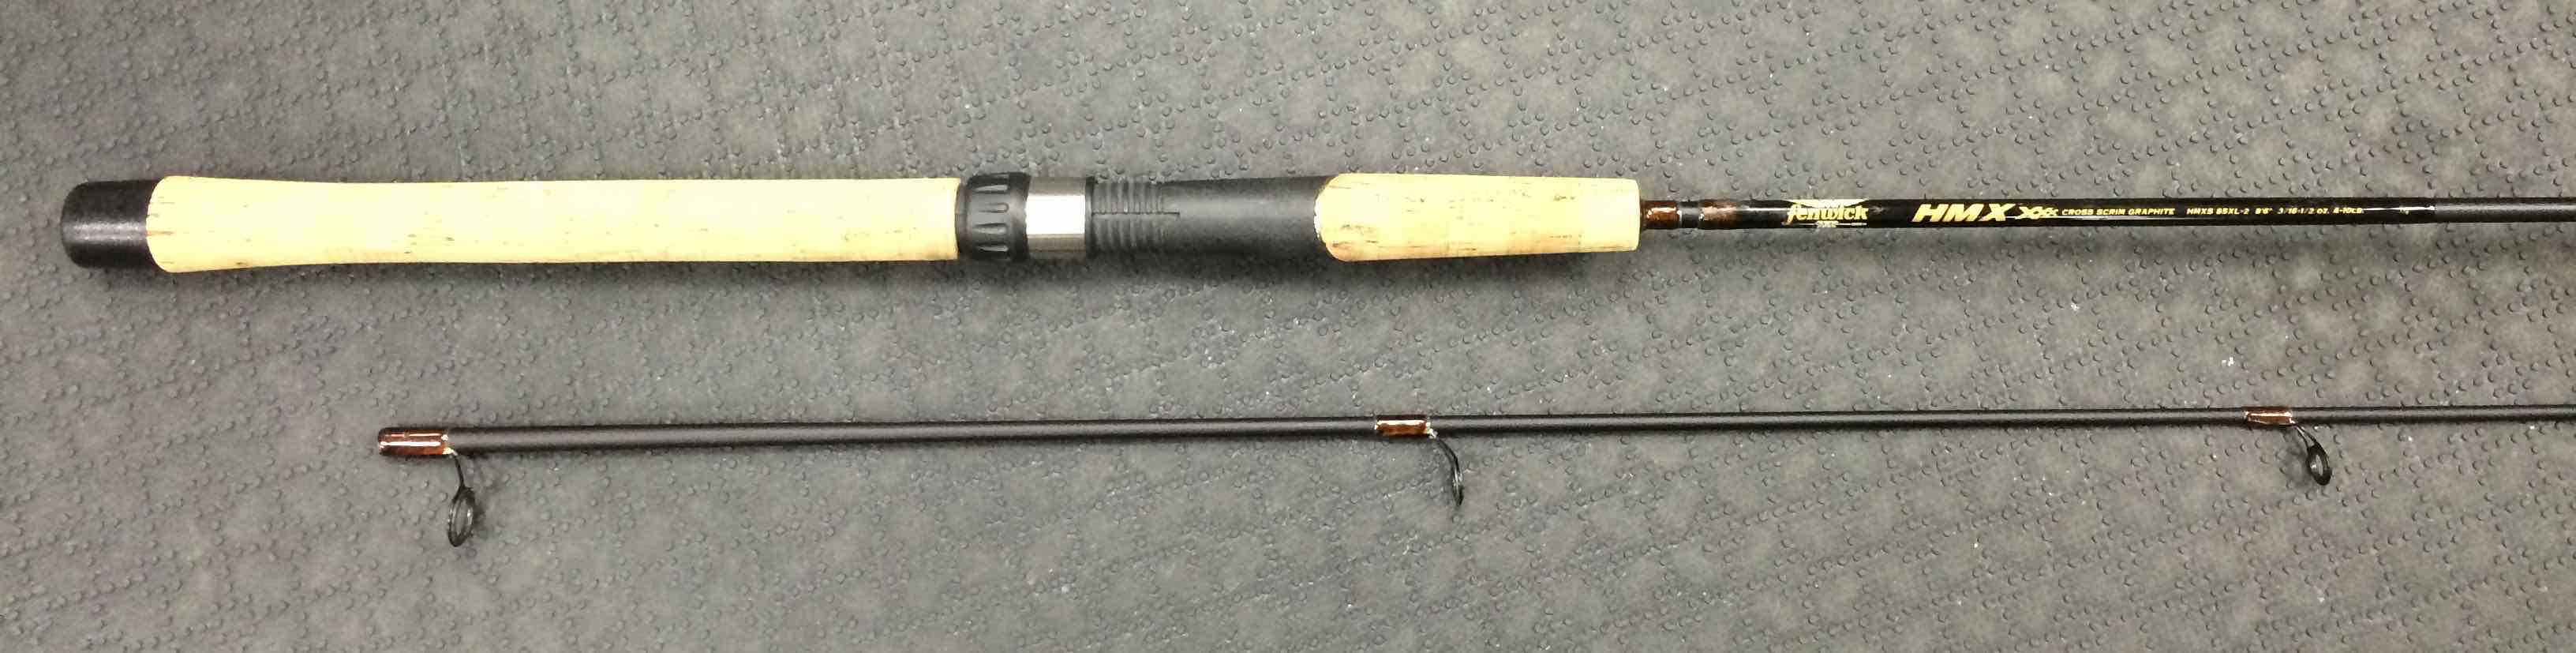 SOLD – NEWER PRICE! – Fenwick HMX – 2 Piece 8'6″ Spinning Rod – $30 – HMXS  85XL-2 – The First Cast – Hook, Line and Sinker's Fly Fishing Shop